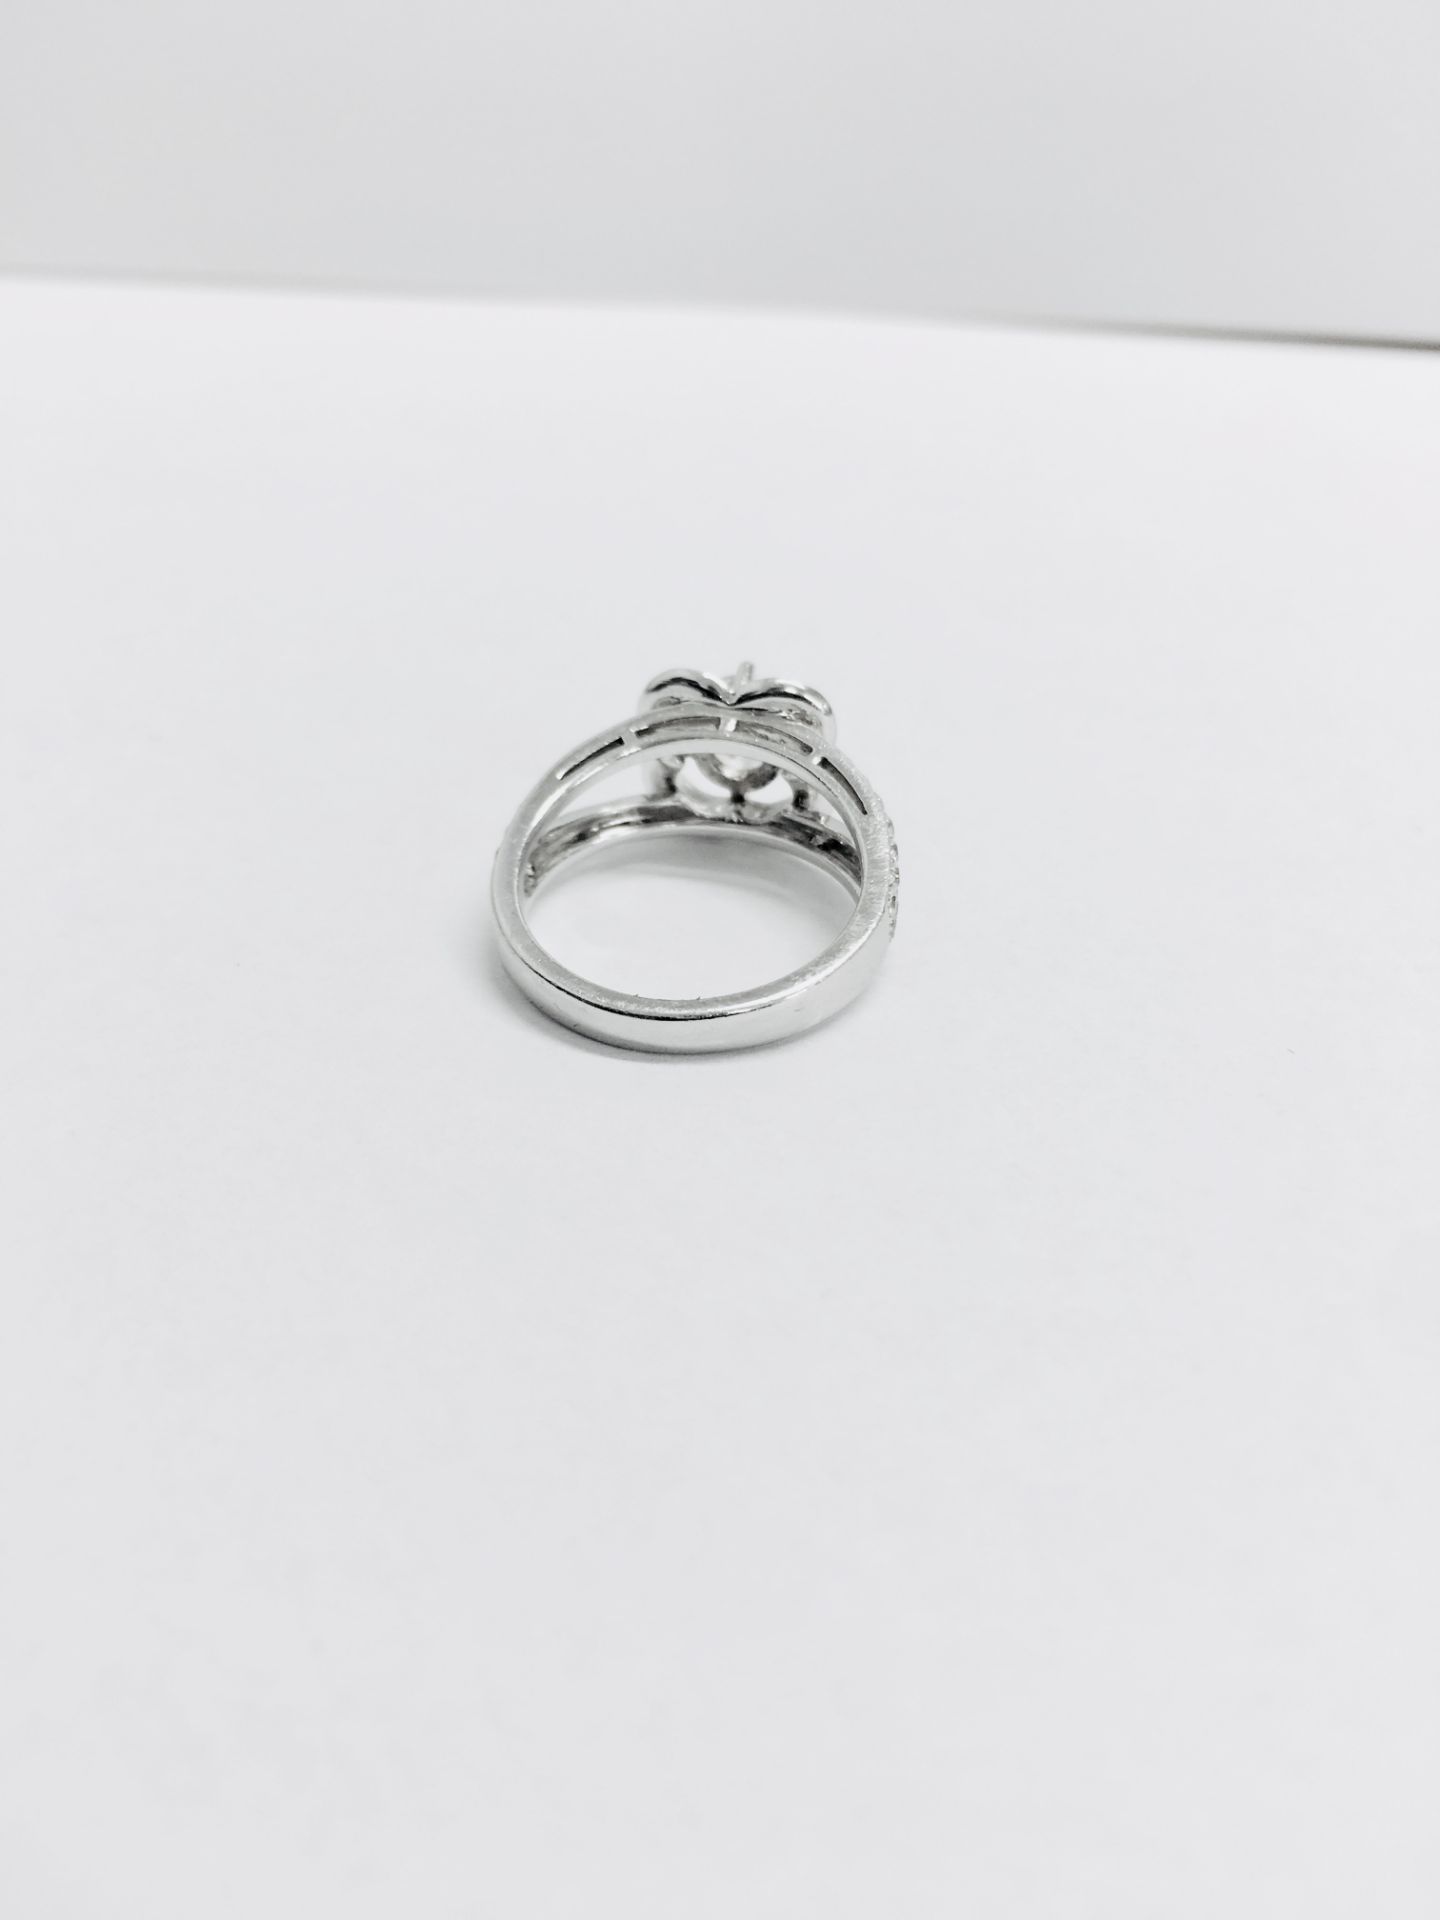 1.04ct diamond set soliatire ring in platinum. H colour and I1 clarity. Halo setting small - Image 3 of 4